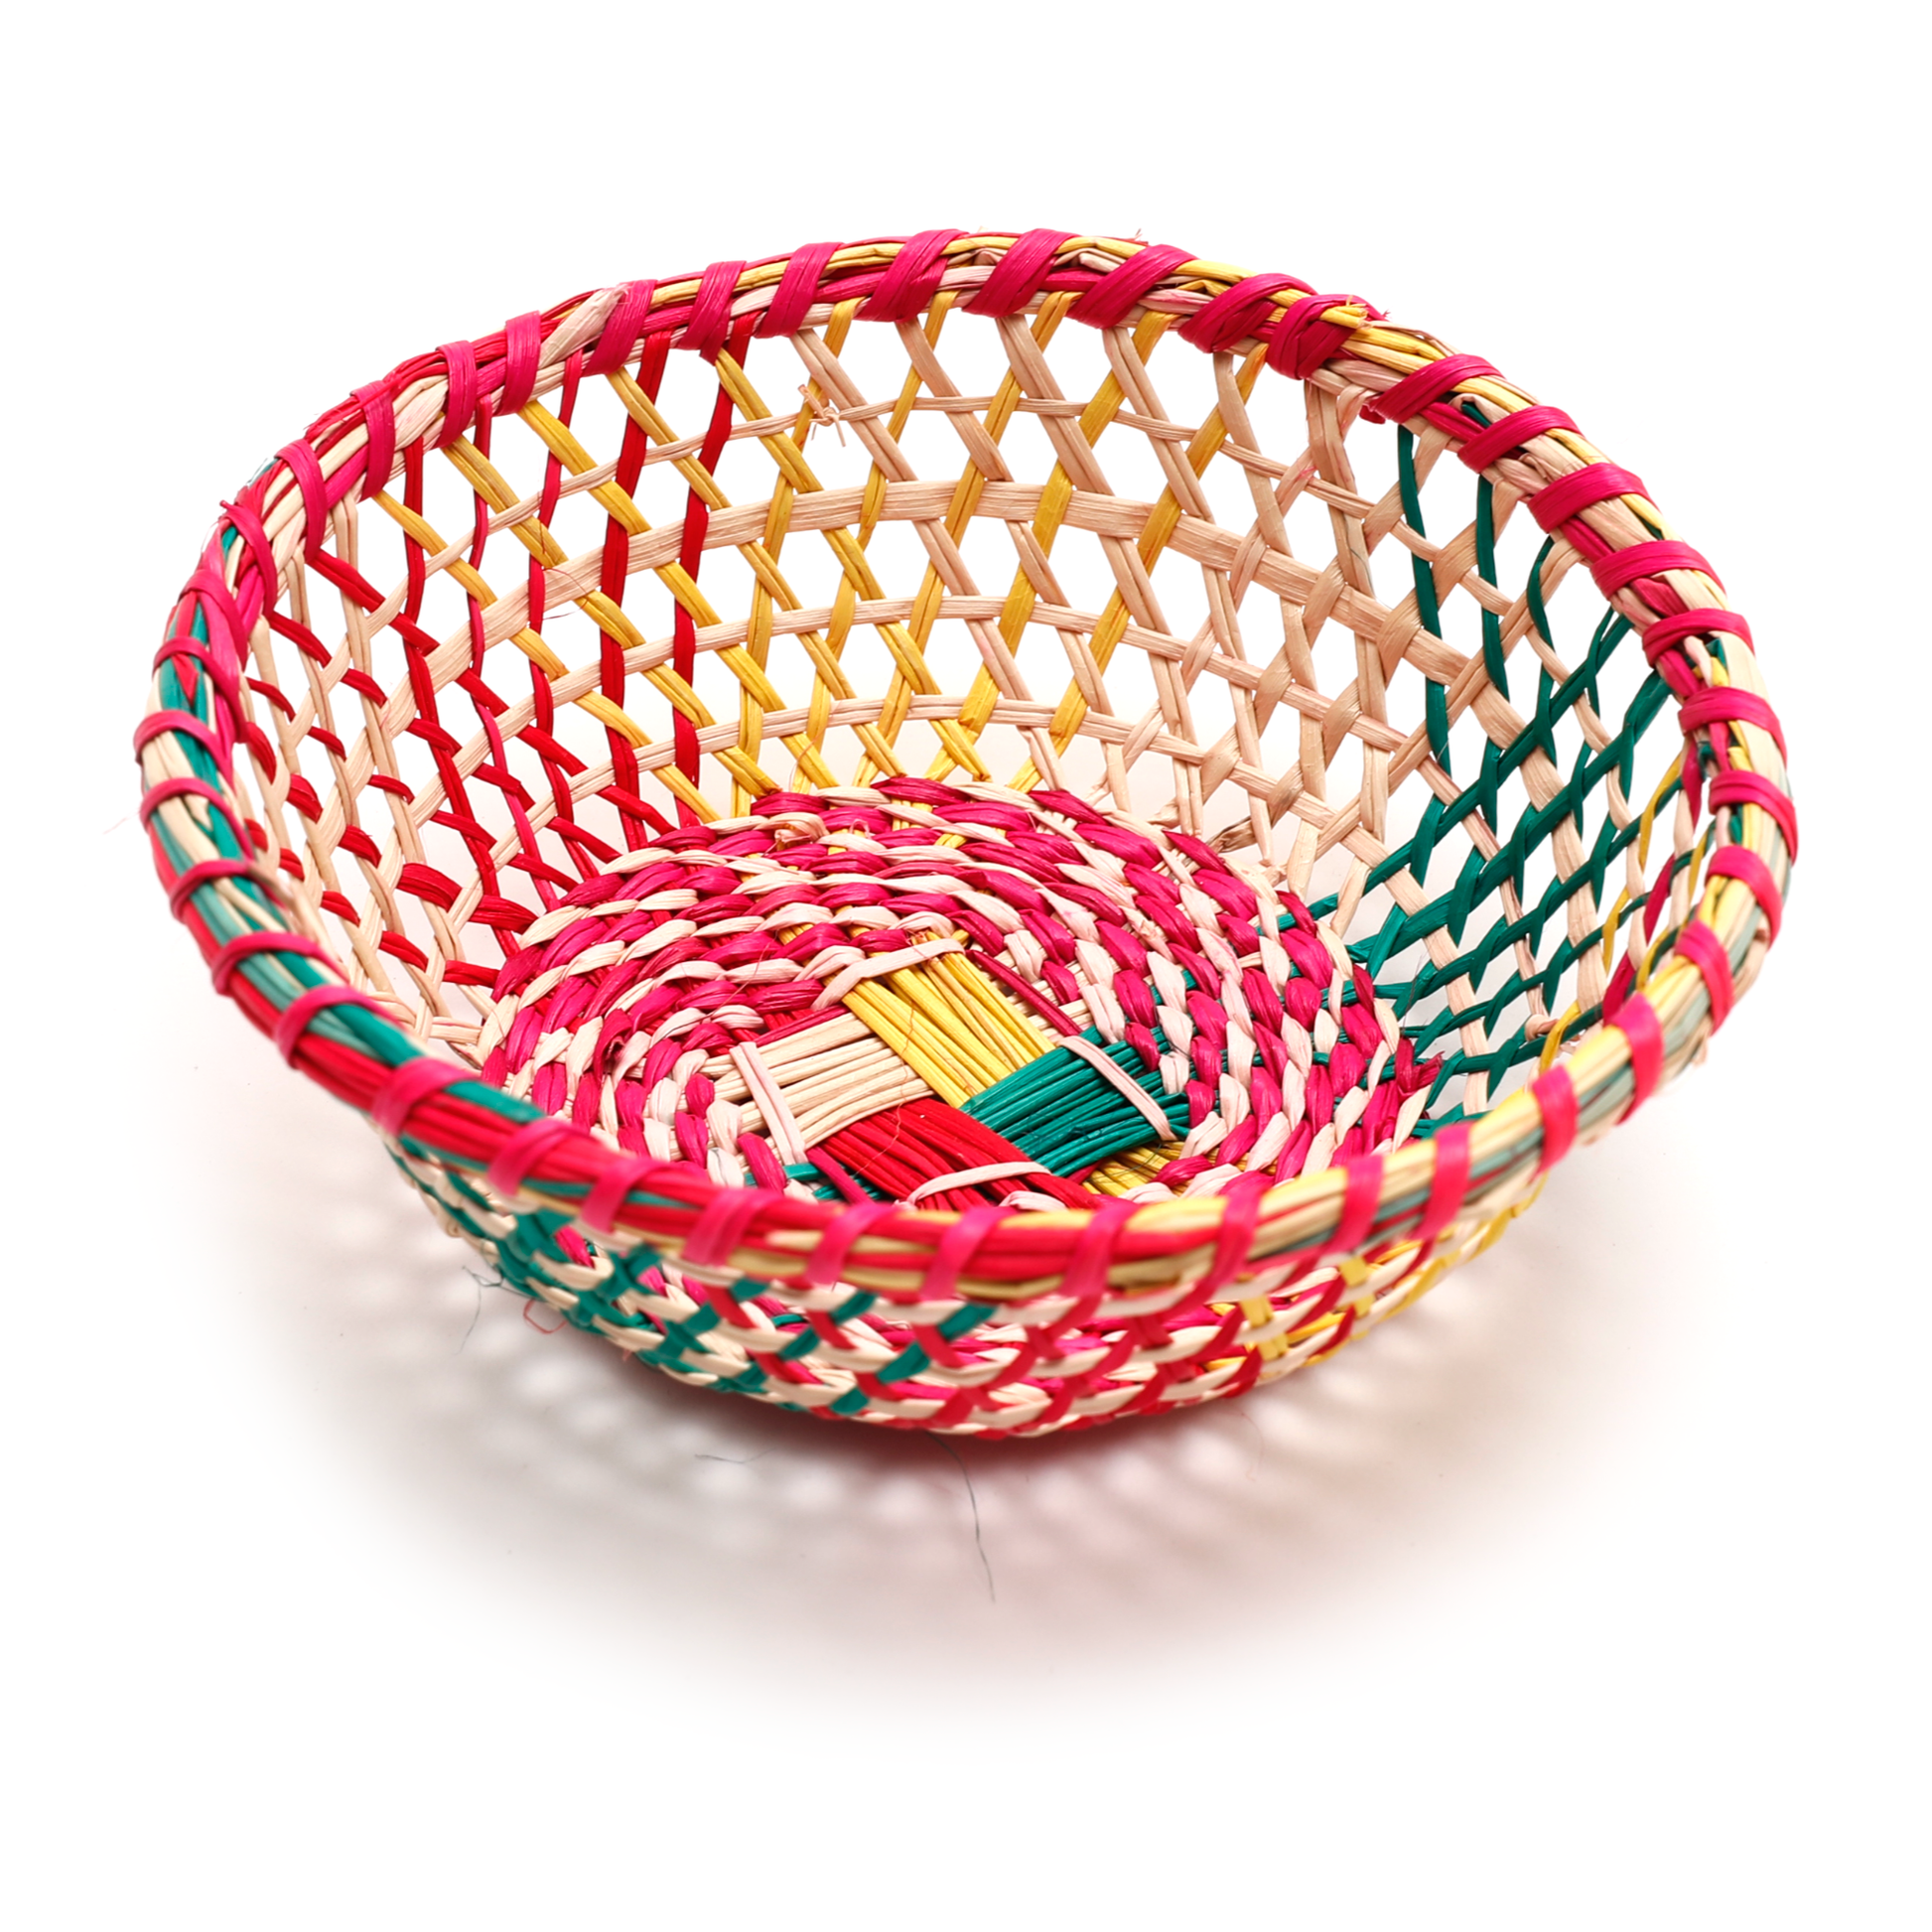 Intiearth-small-colorful-straw-storage-baskets 2